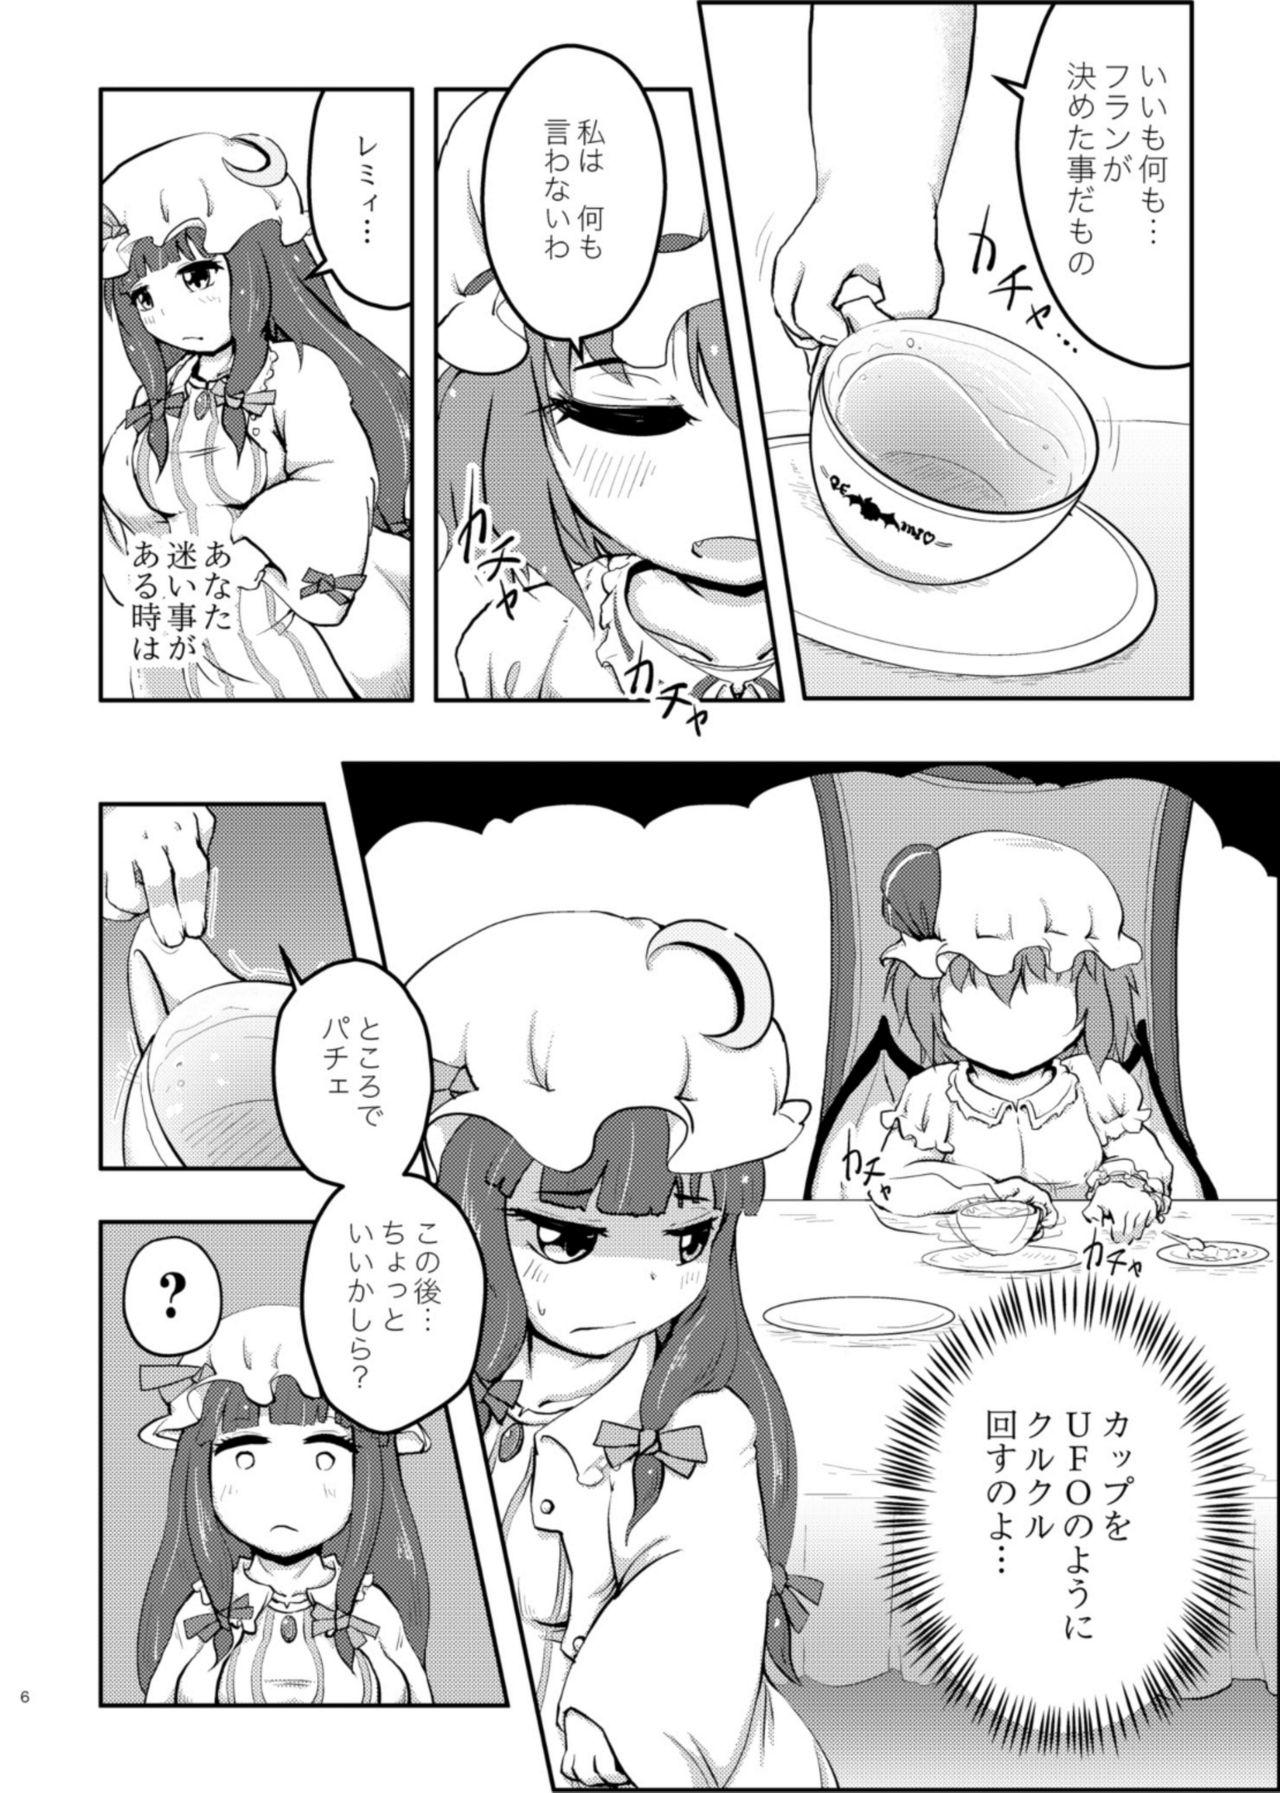 Goth Scarlet Conflict 2 - Touhou project Pussy Fucking - Page 6